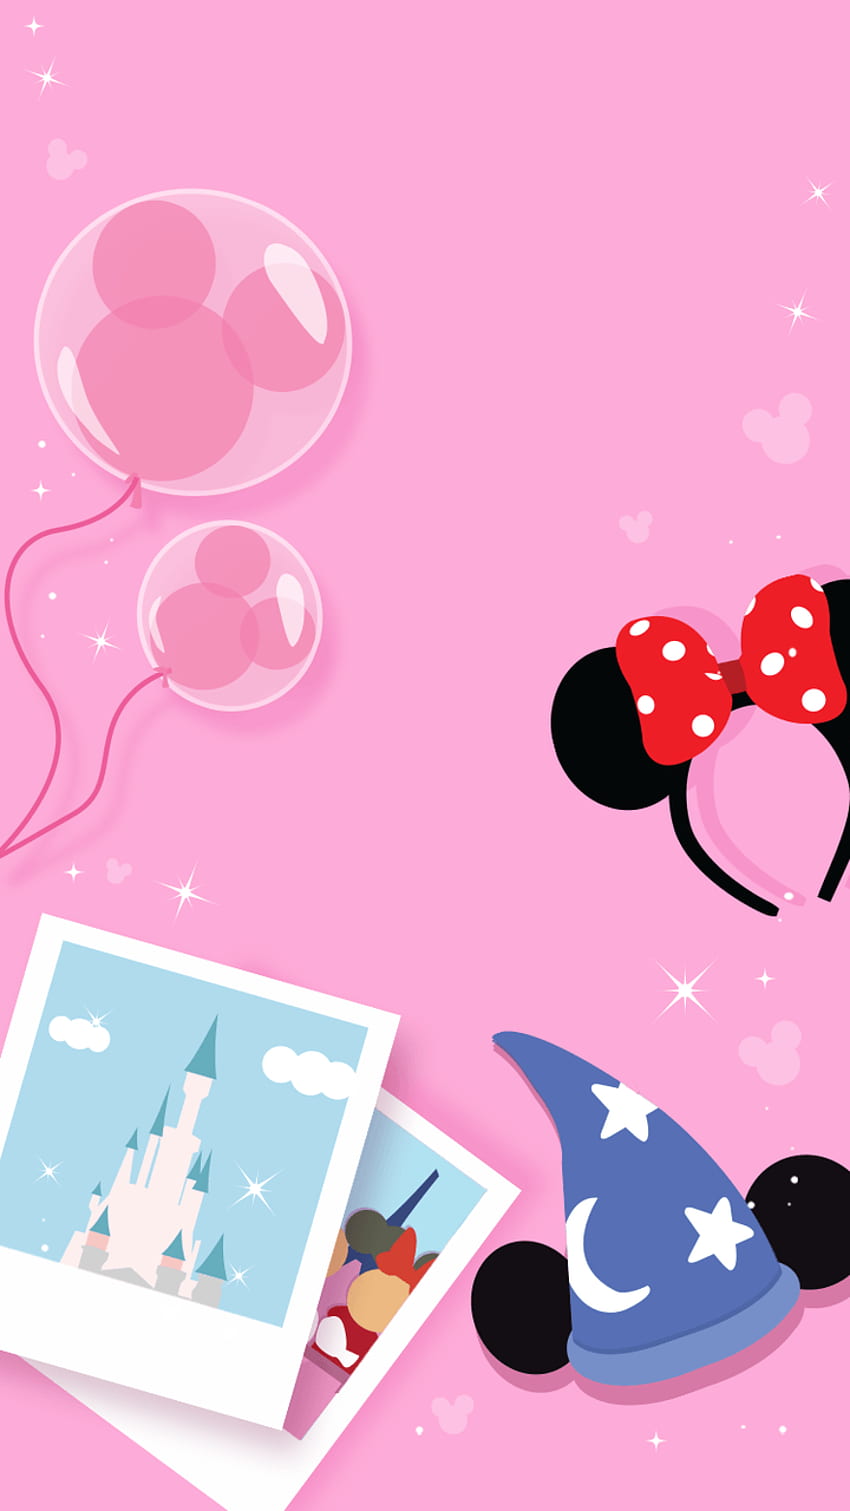 tentang Mickey & Minnie Mouse, Pink Minnie Mouse wallpaper ponsel HD